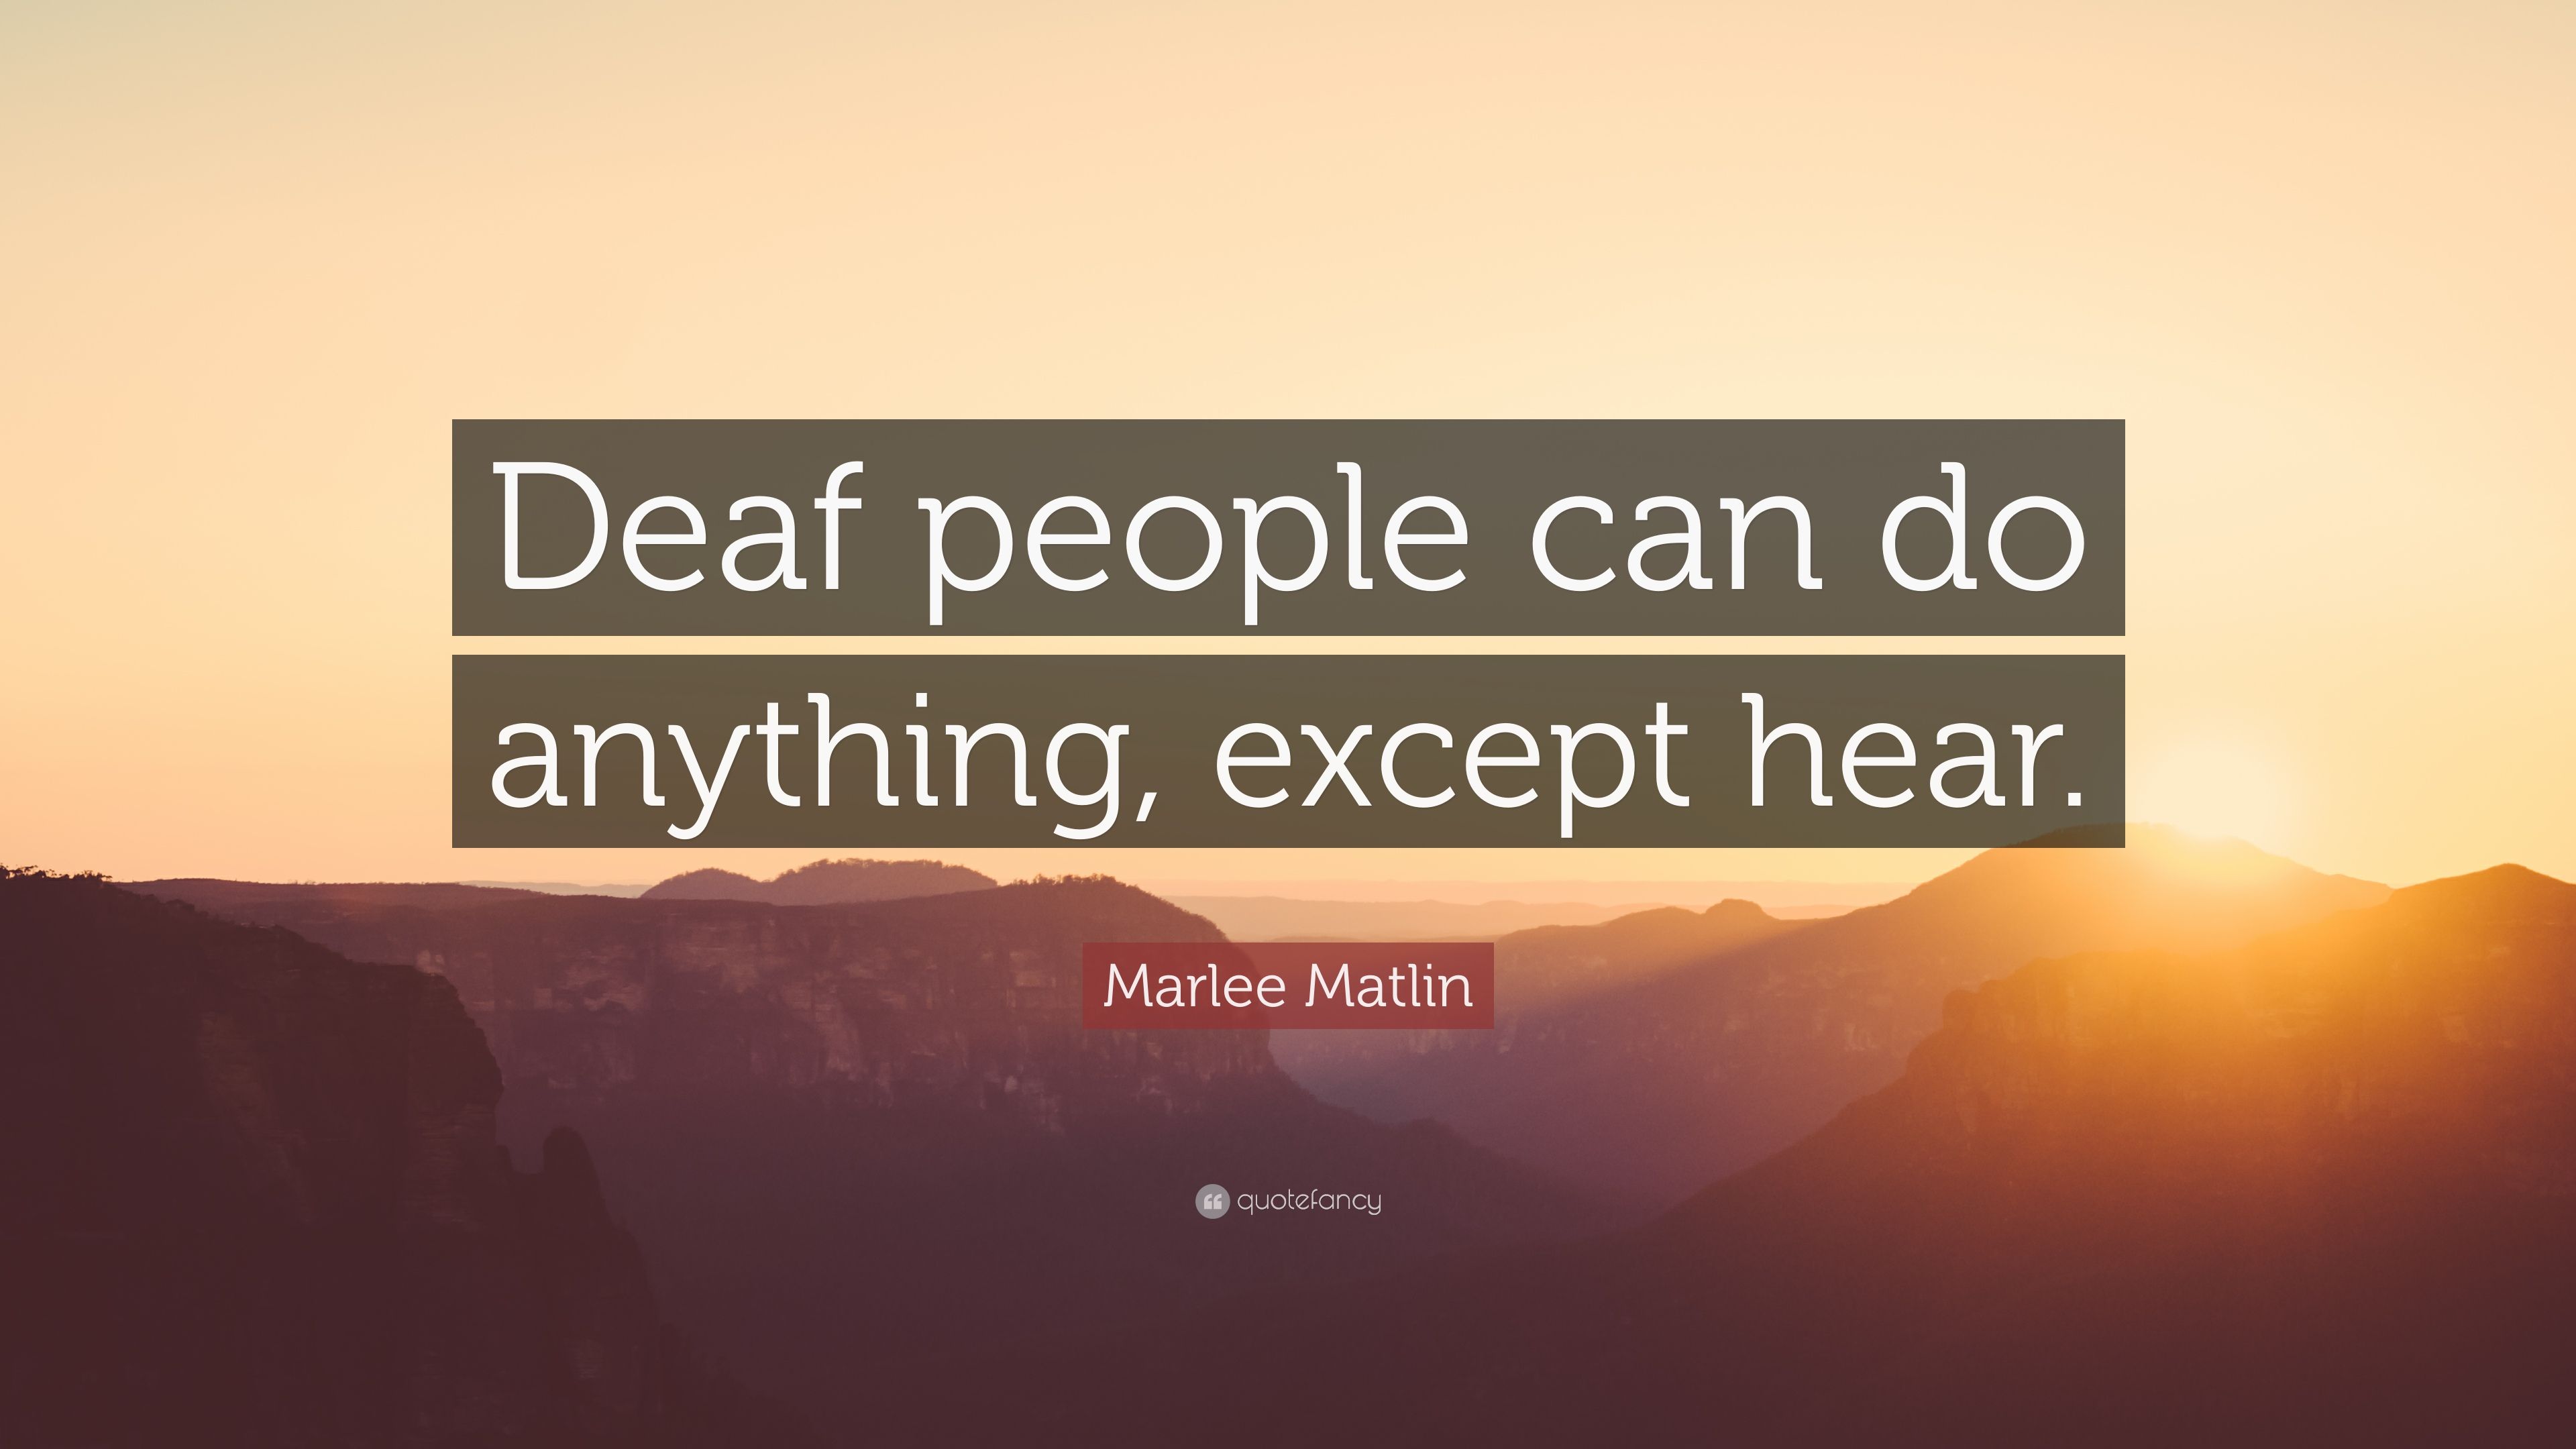 Marlee Matlin Quote: “Deaf people can do anything, except hear